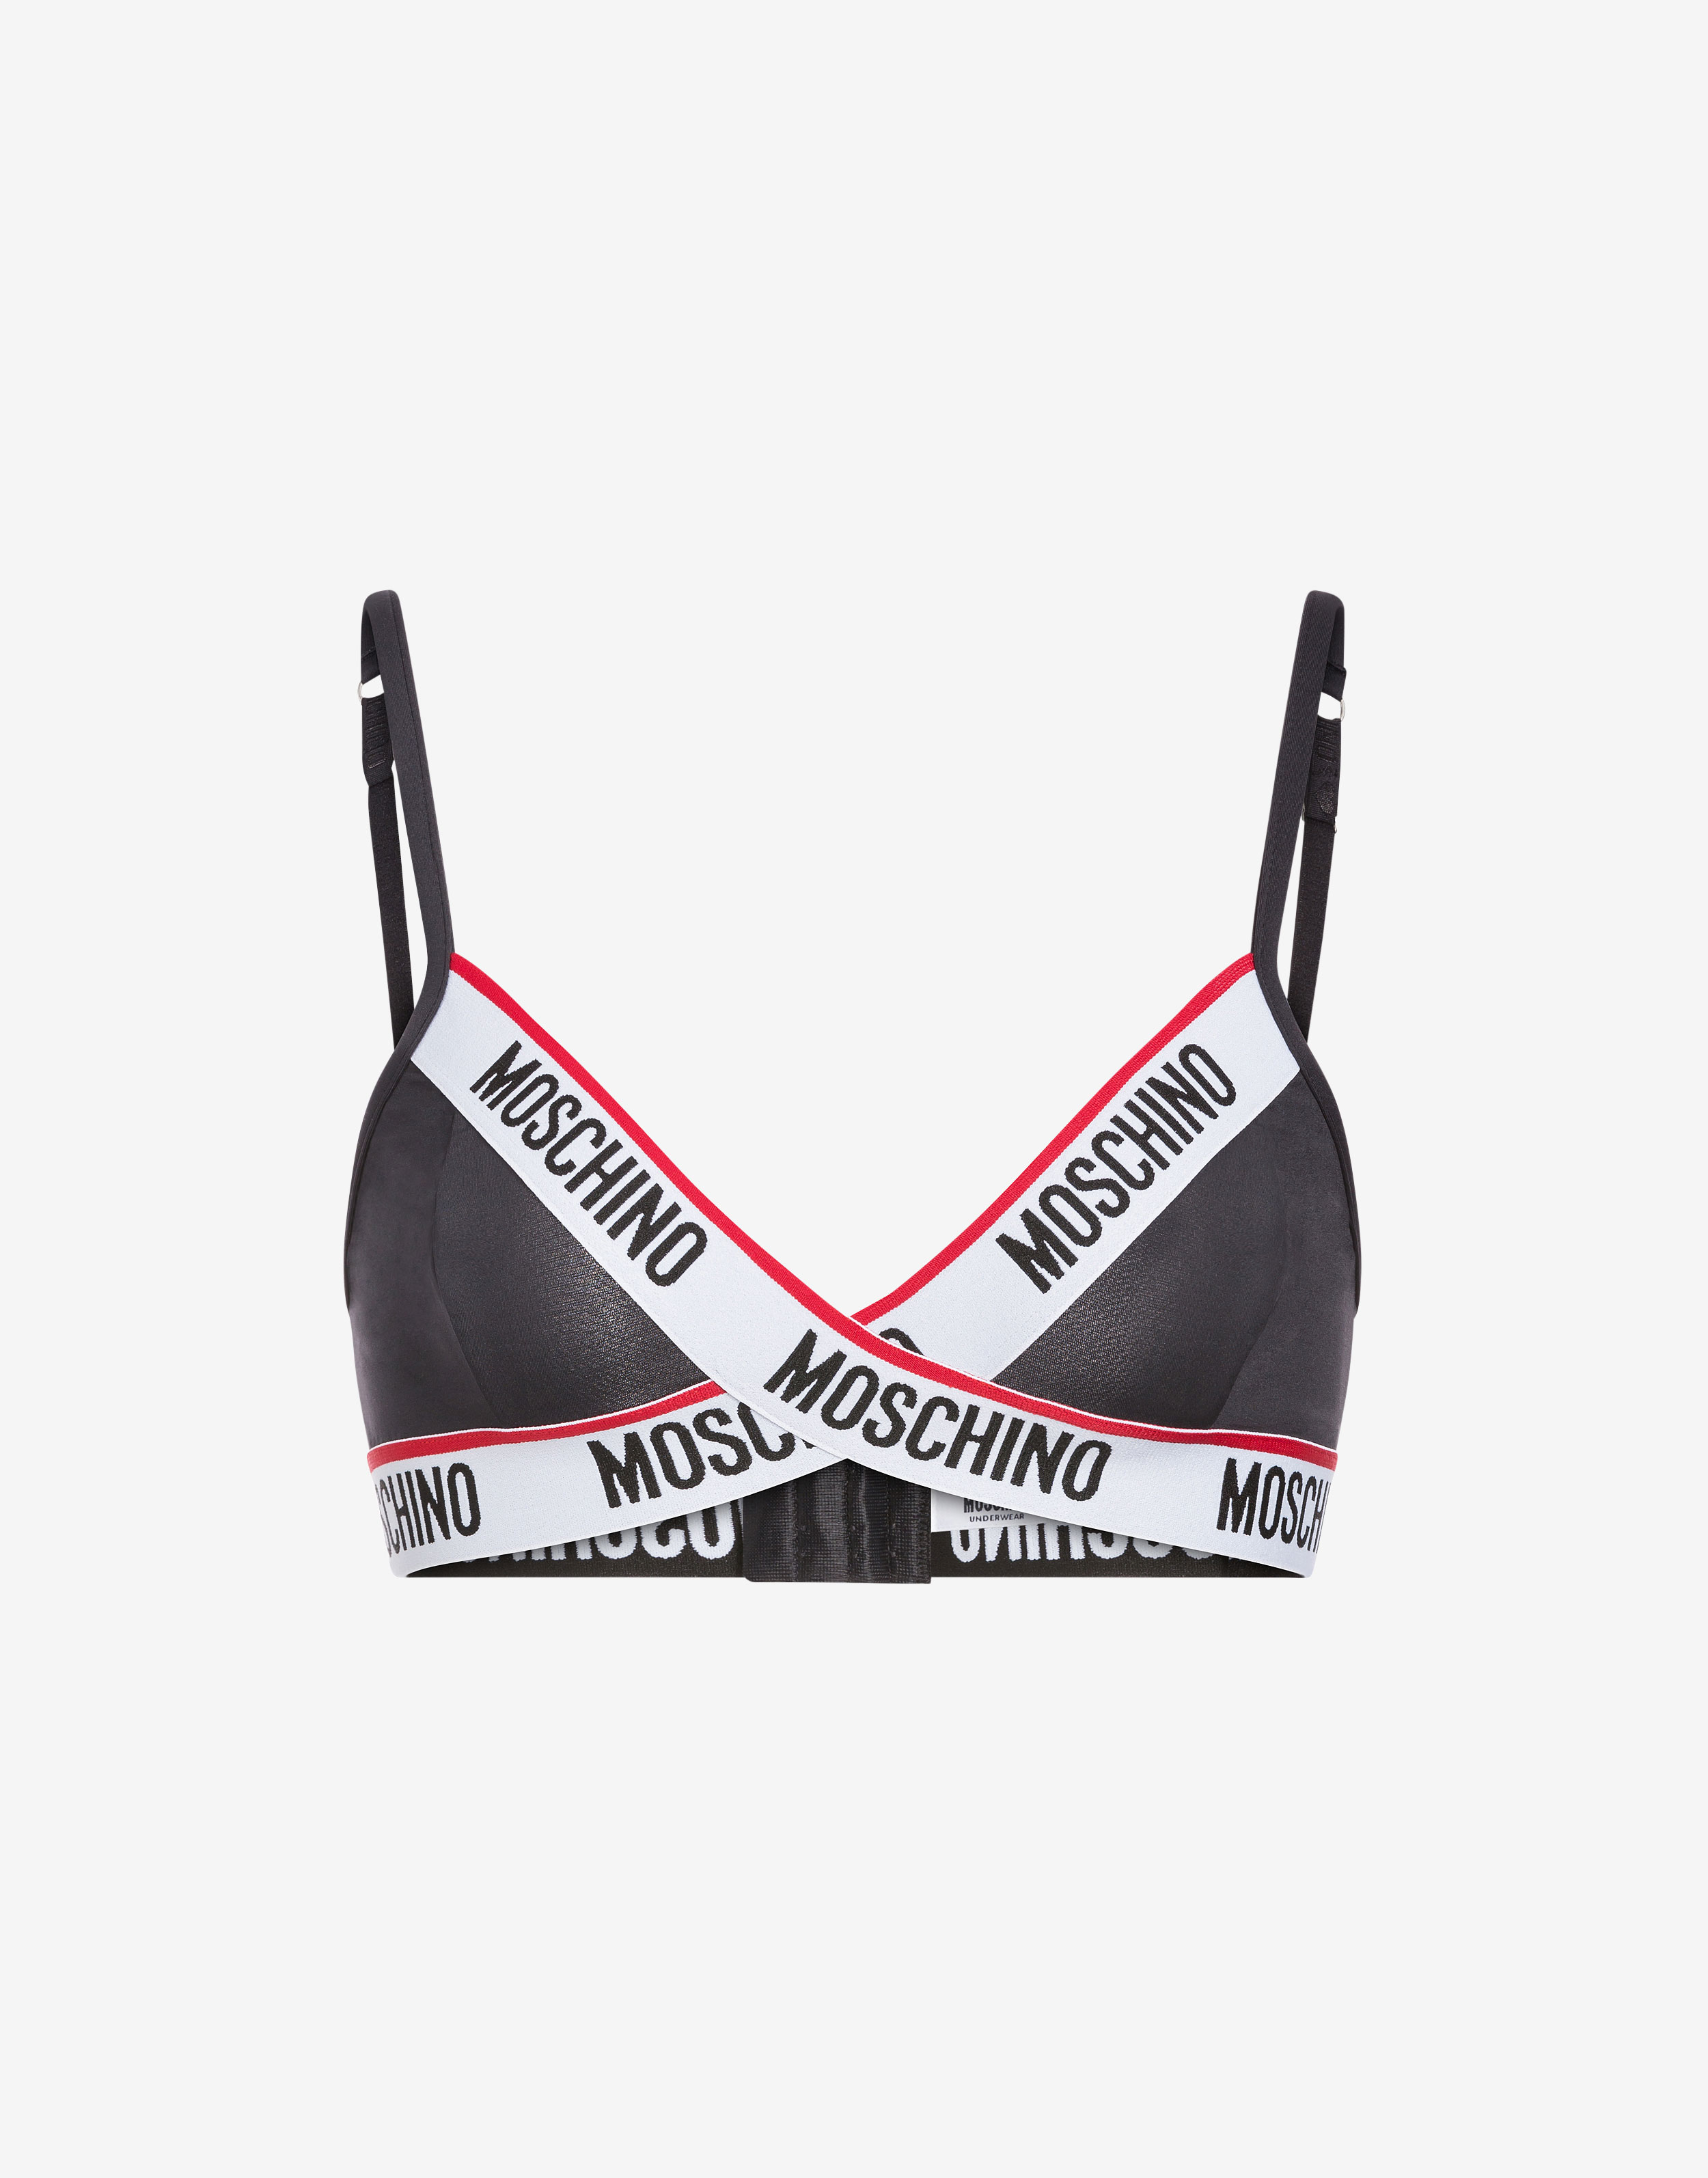 Moschino Underwear for Women - Official Store